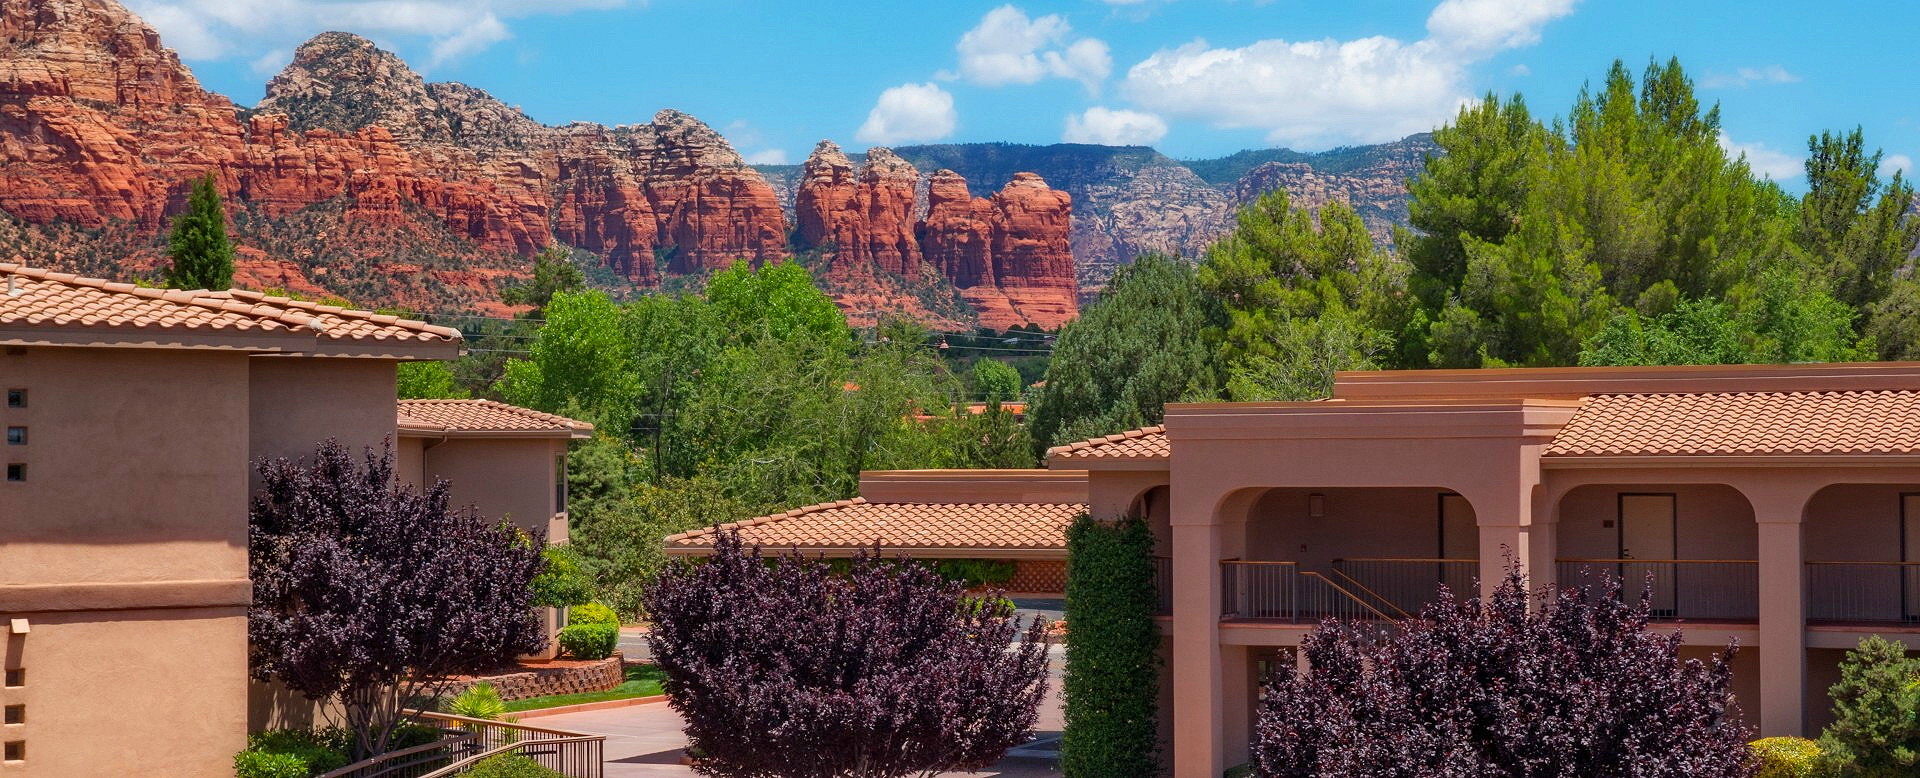 Sedona Real Inn & Suites with red rocks in background